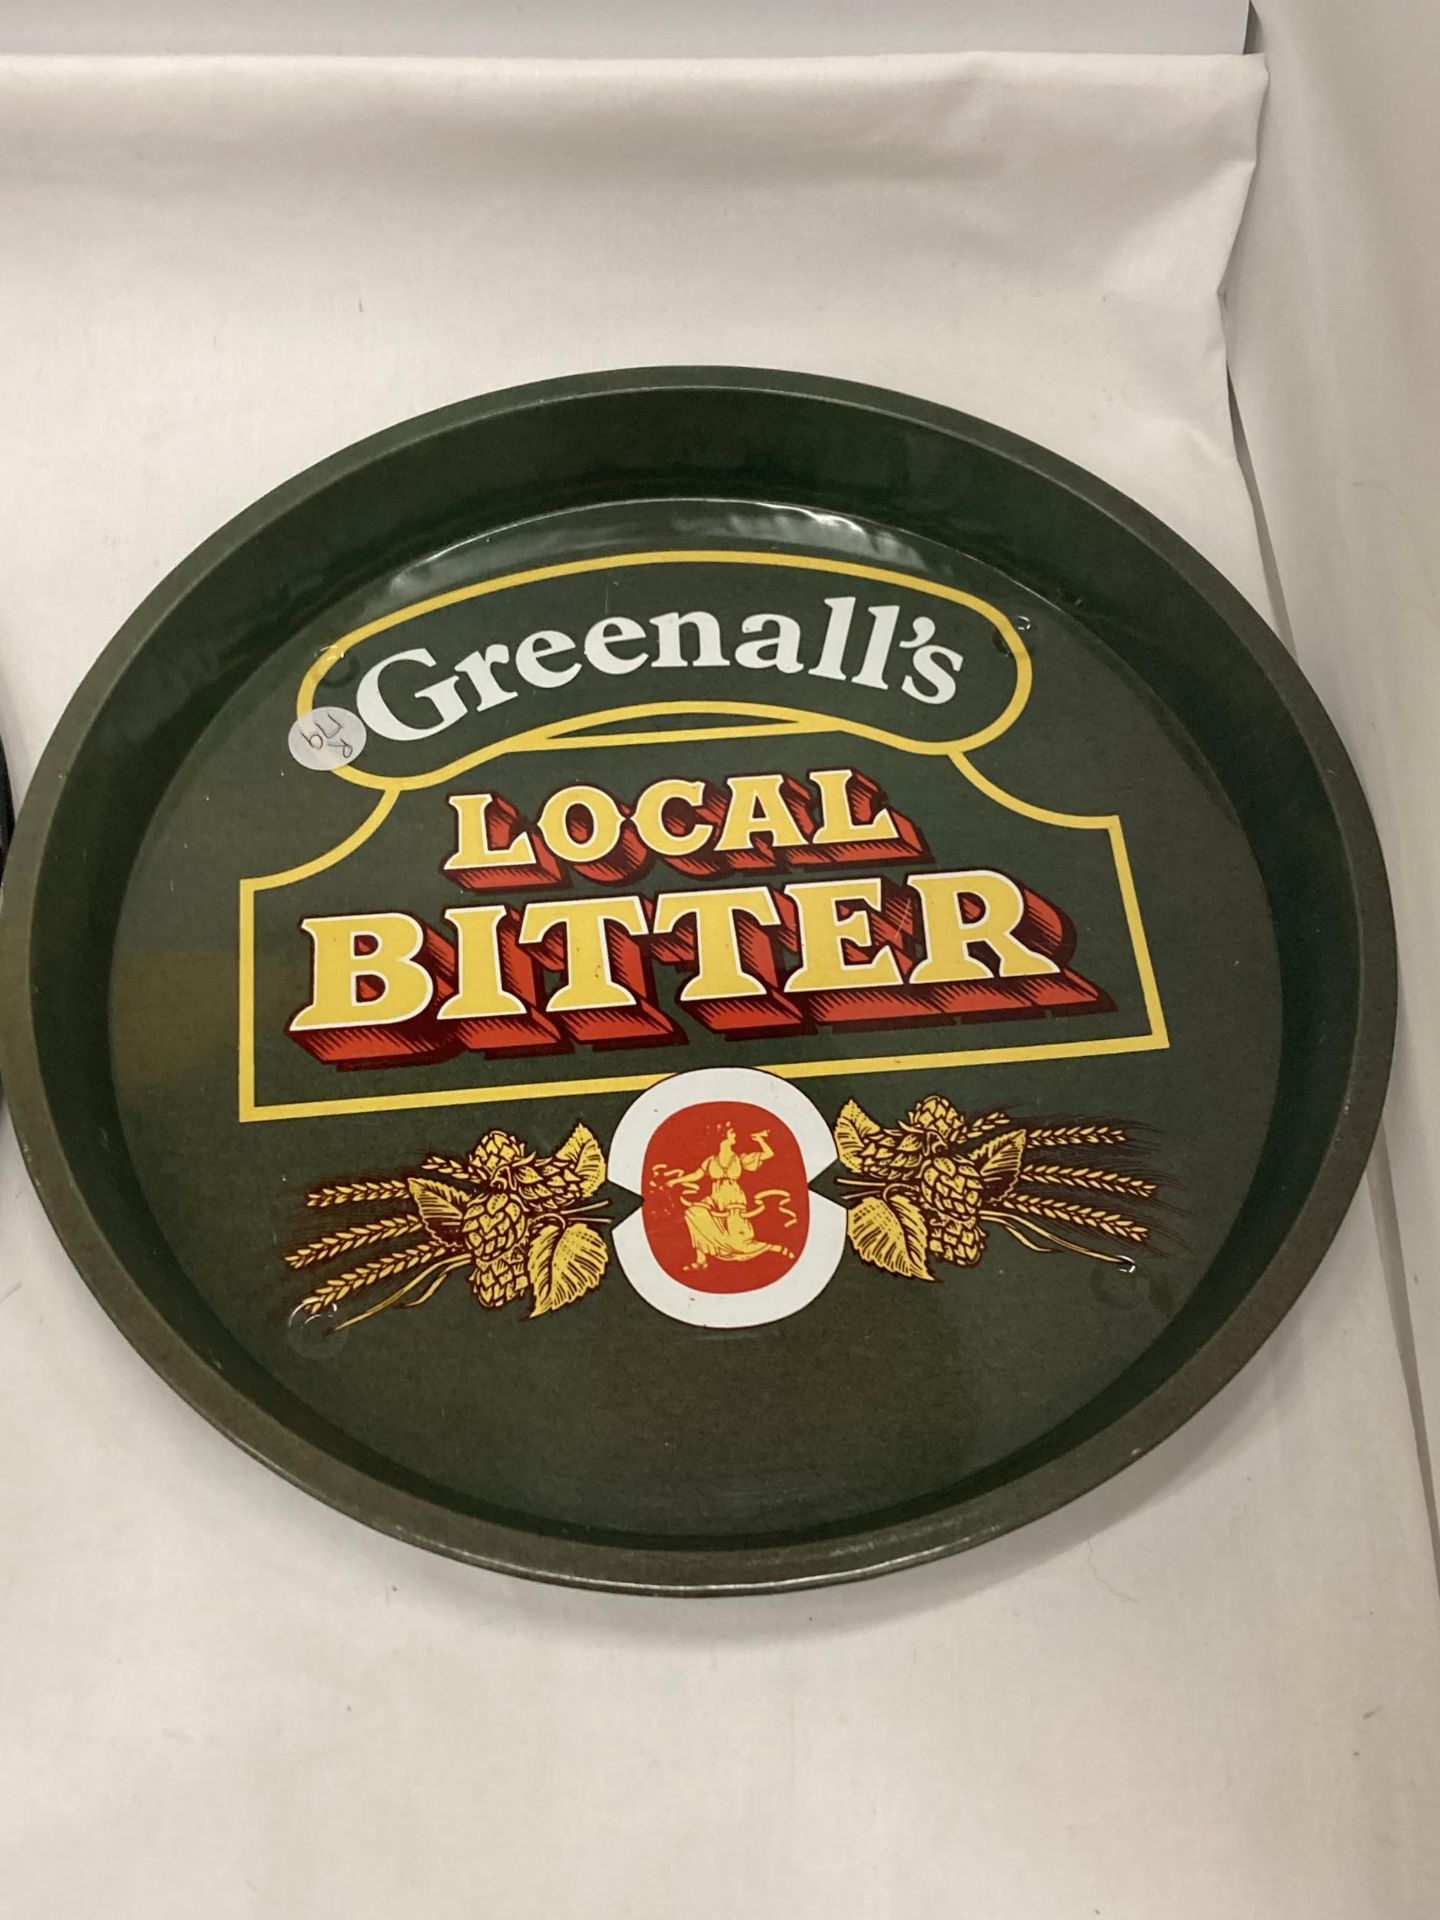 TWO VINTAGE METAL BEER TRAYS, TETLEY AND GREENHALL'S - Image 2 of 3